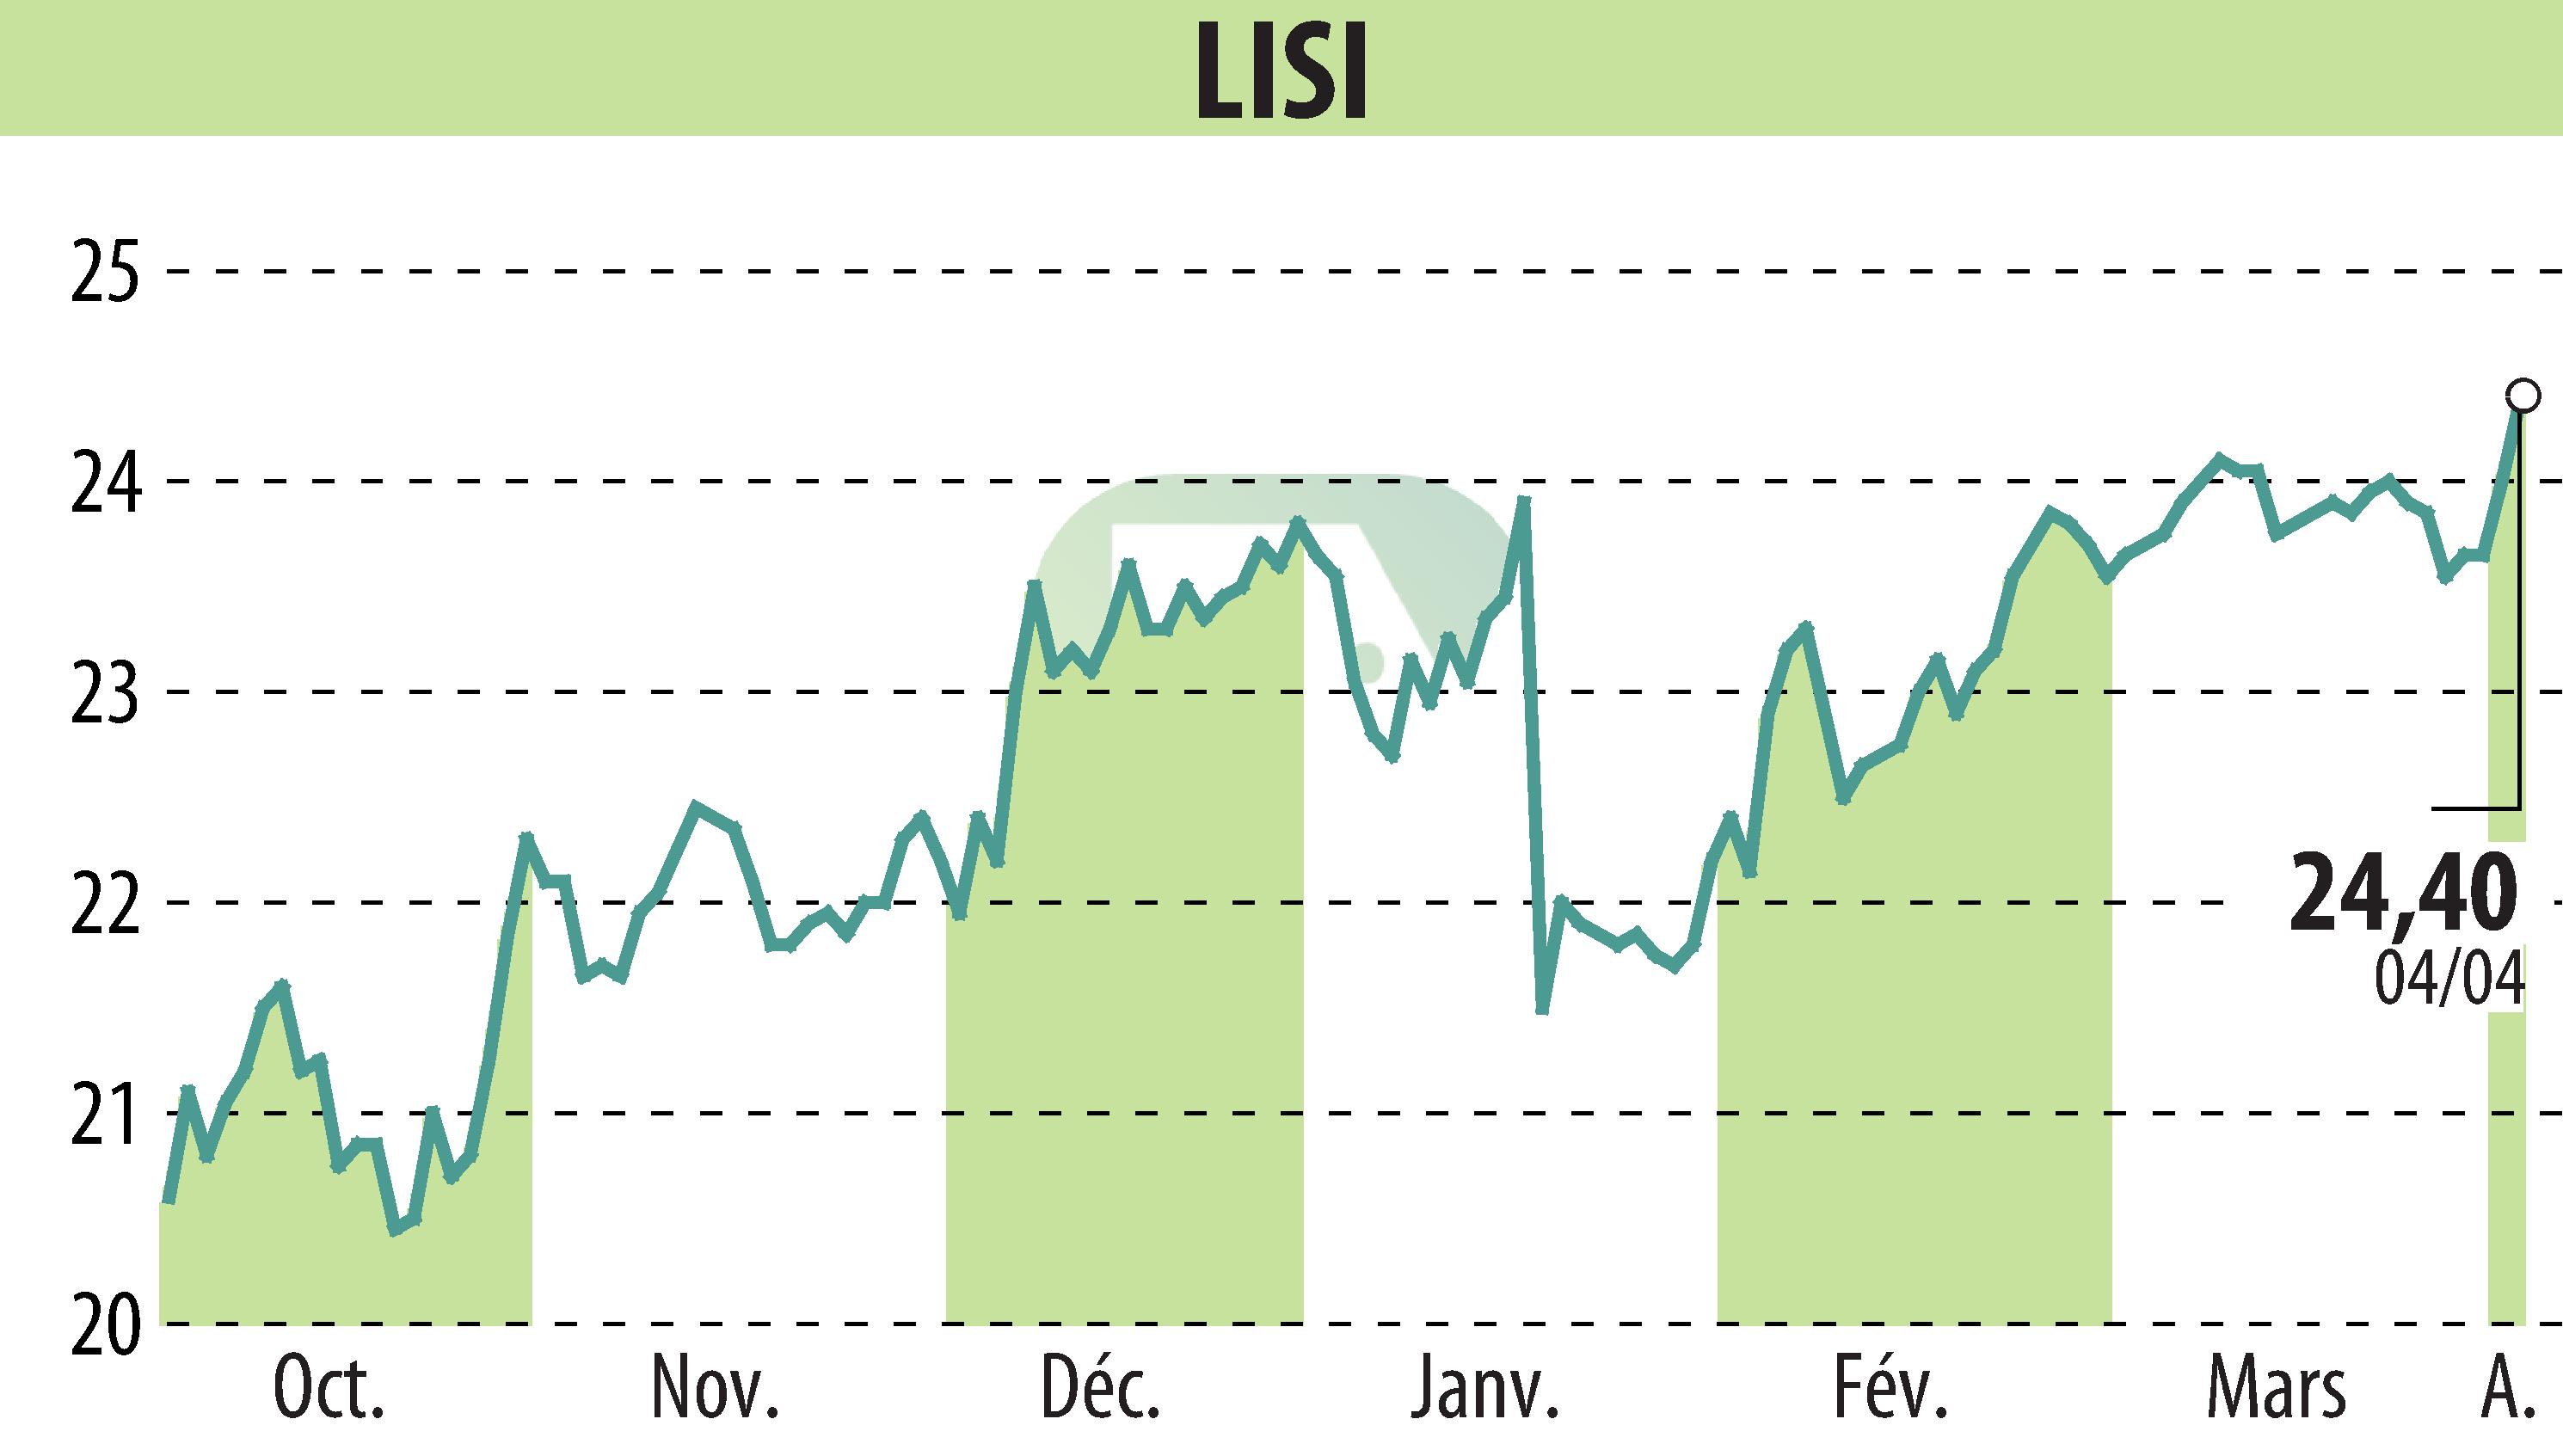 Stock price chart of LISI (EPA:FII) showing fluctuations.